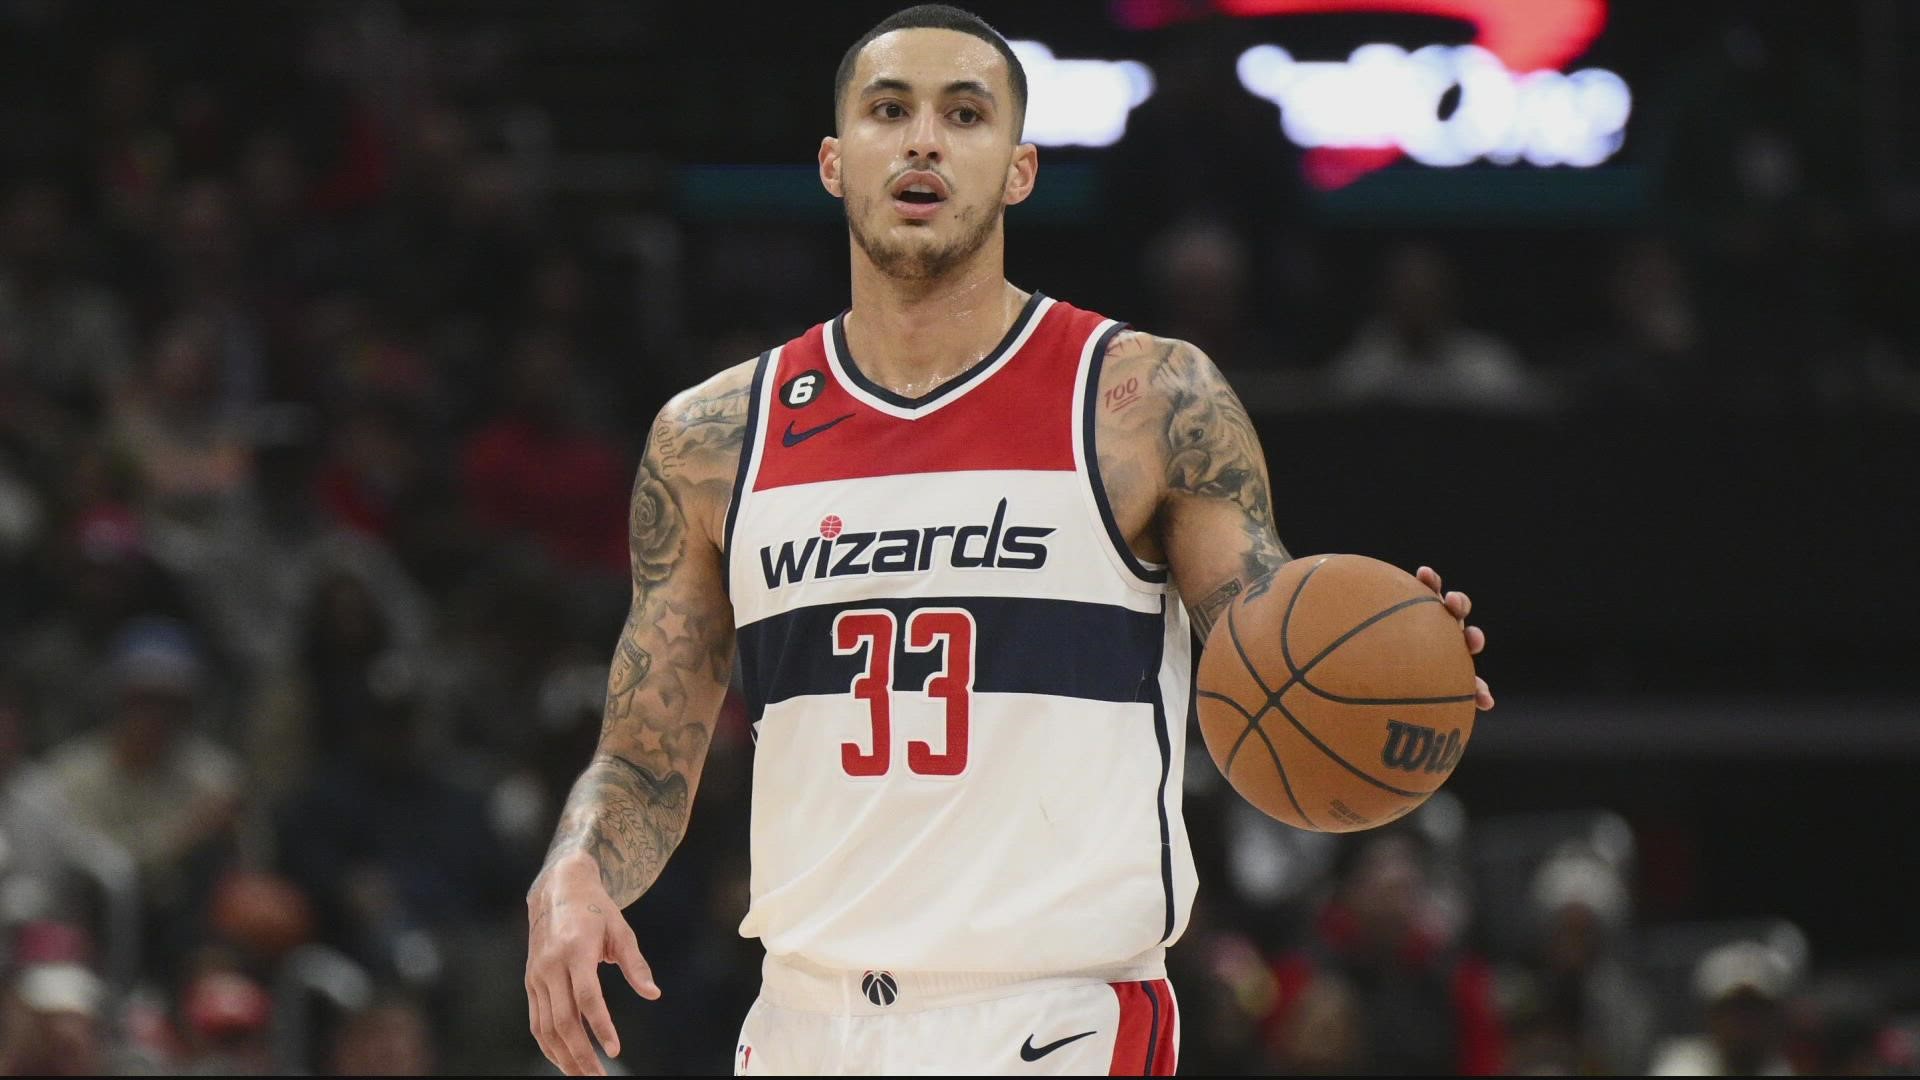 The Wizards forward donated $1 million to the YMCA in Flint, Michigan.